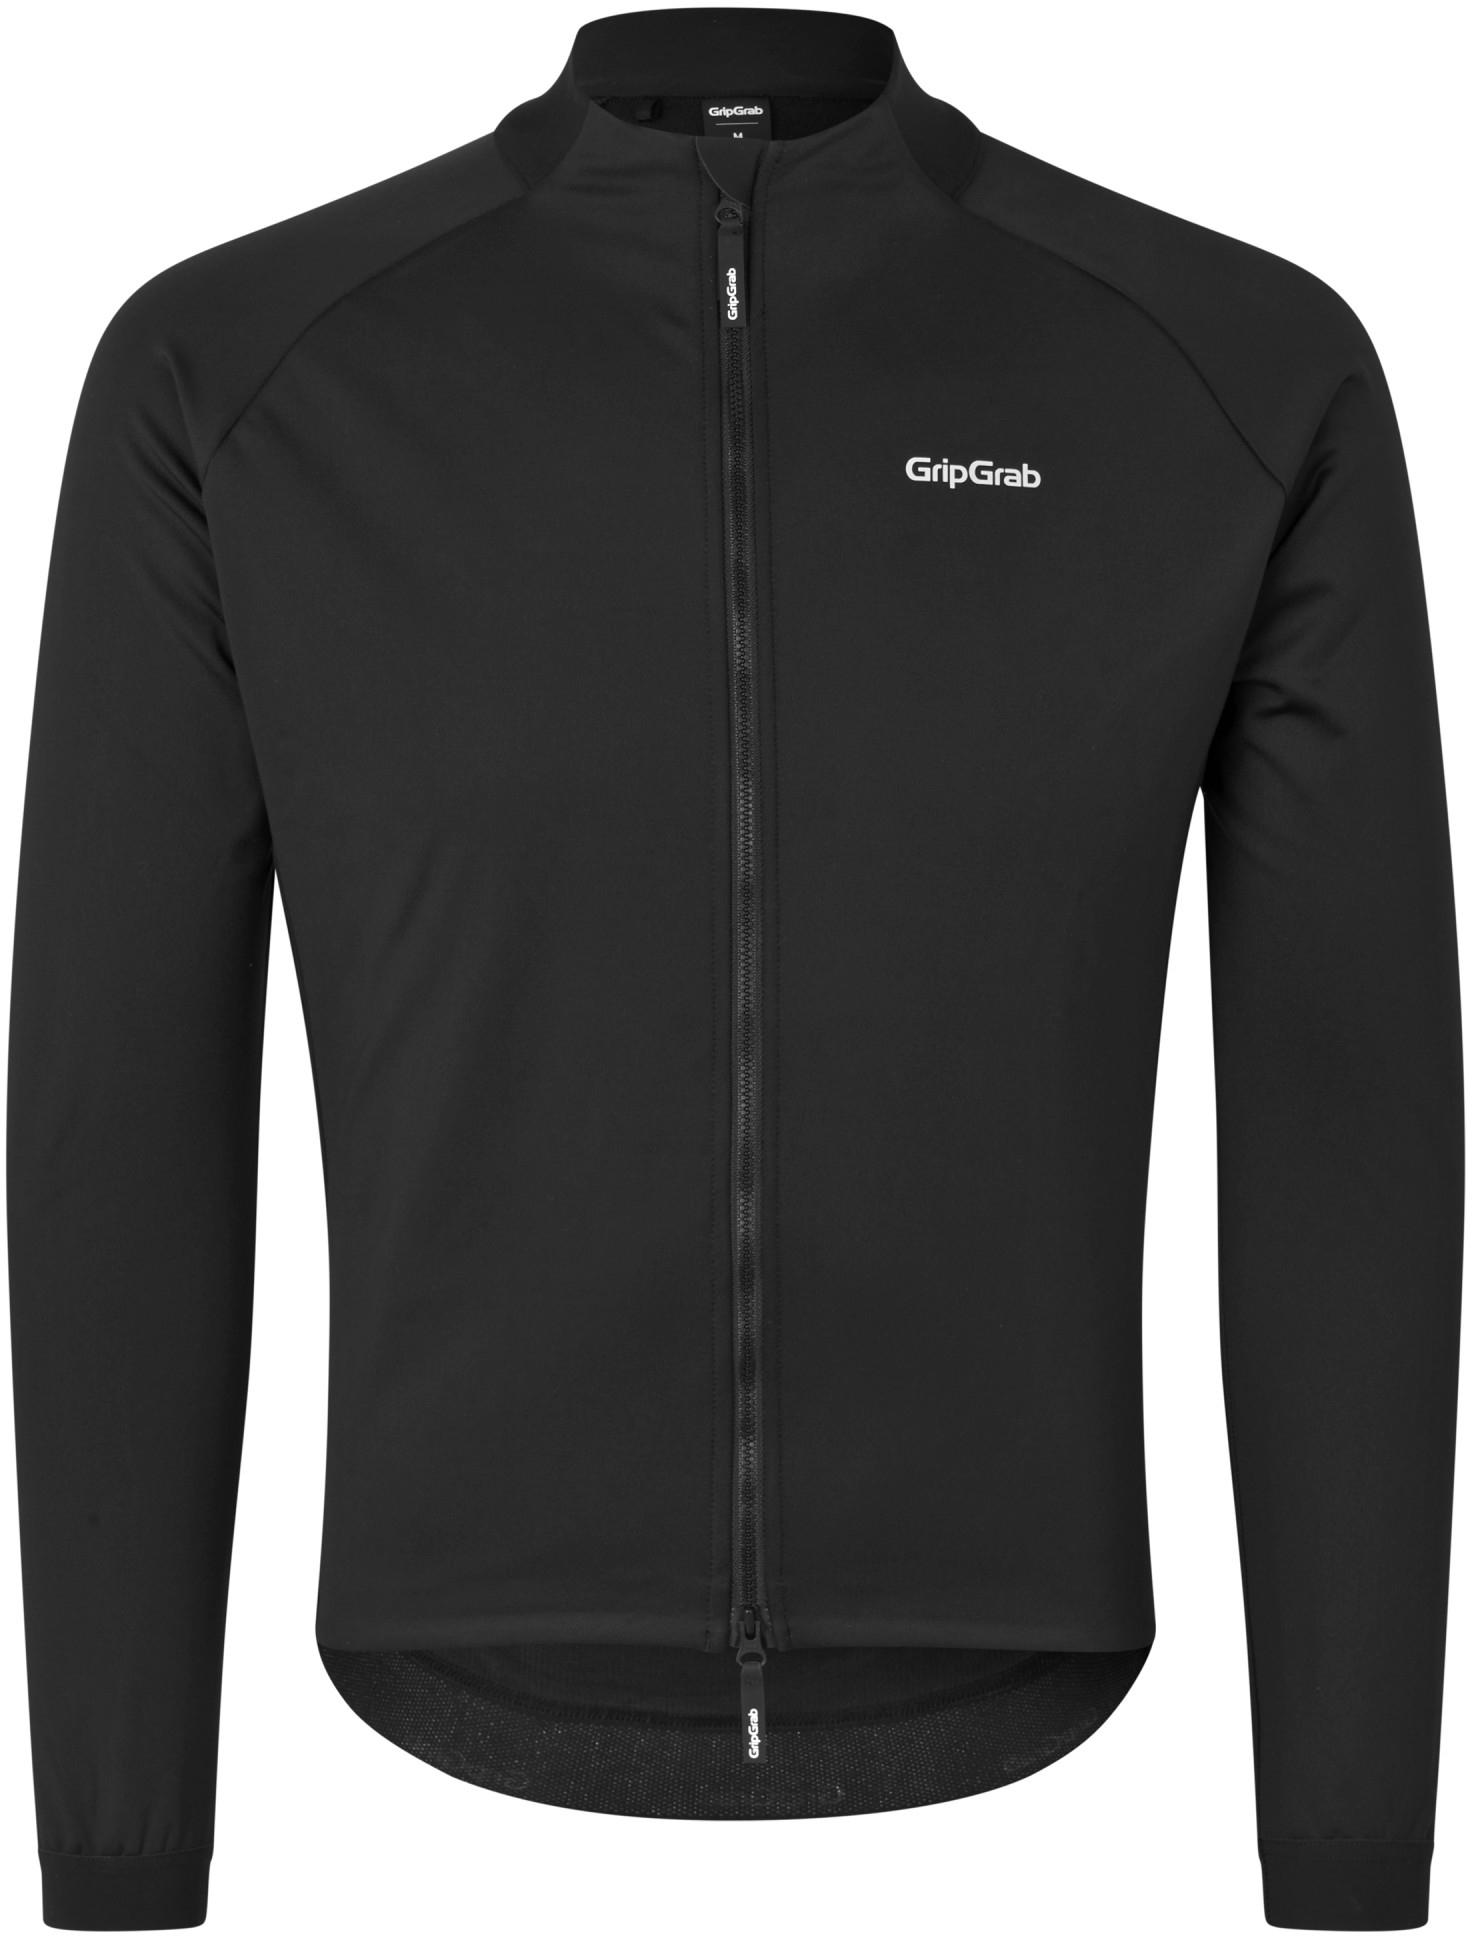 Gripgrab Thermashell Windproof Winter Jacket - Black